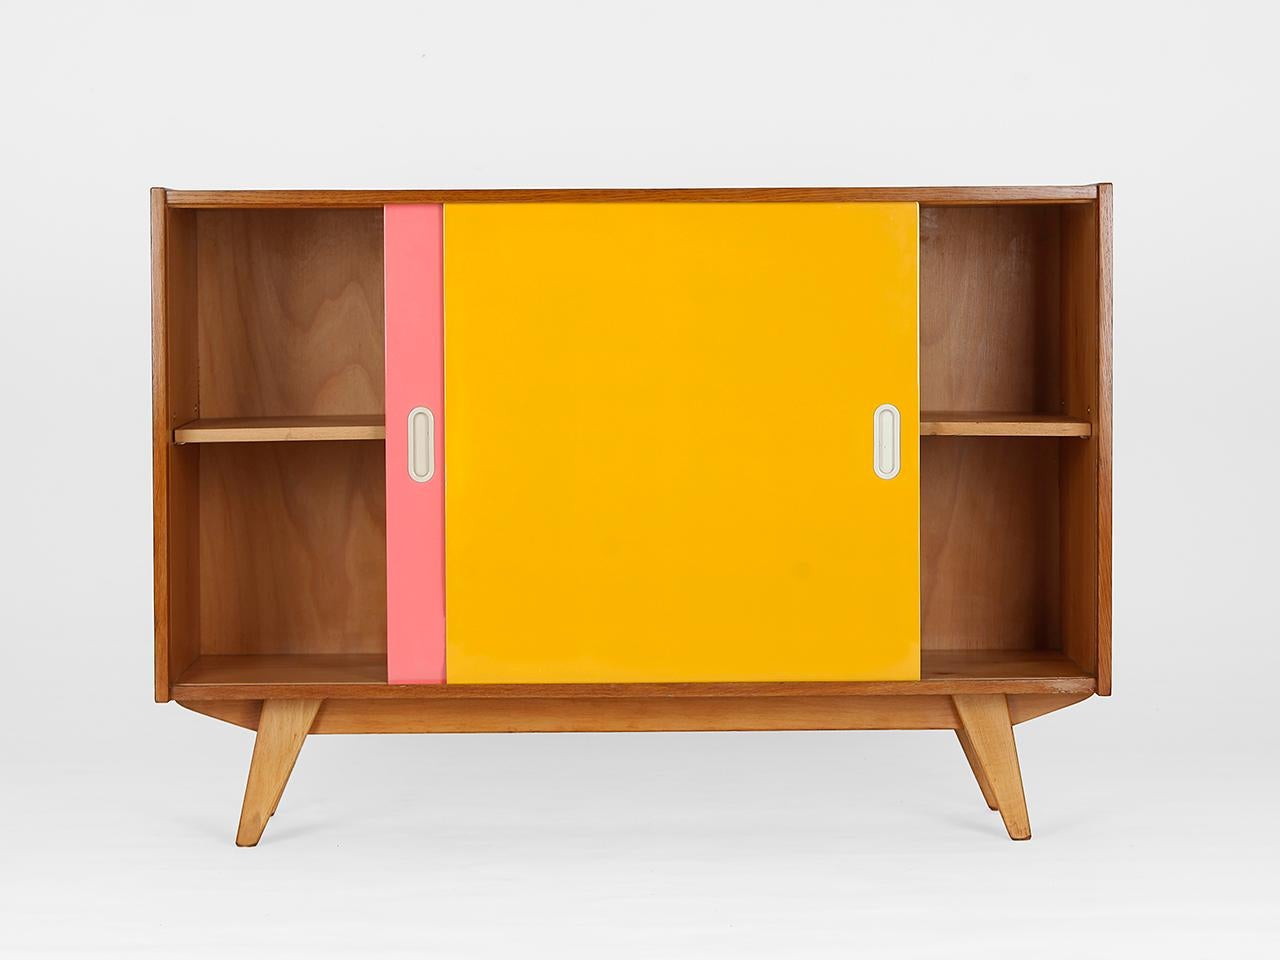 Midcentury sideboard U - 452 by Jiri Jiroutek for Interier Praha, dating from the 1960s, with gray and pink sliding doors from the former Czechoslovakia. Completely restored. Delivery time 3-4 weeks.